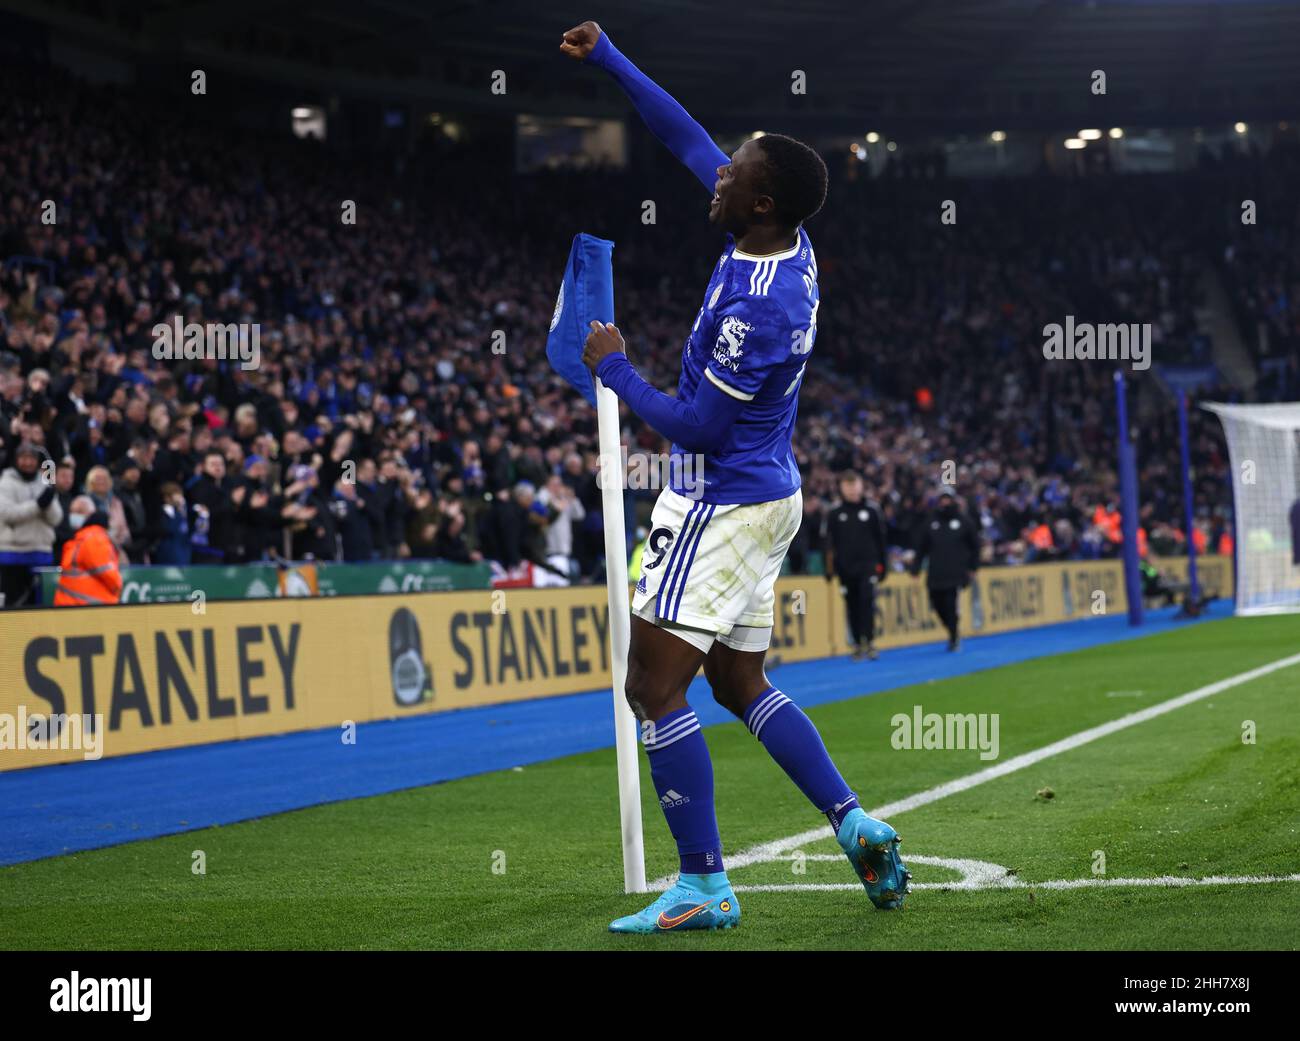 Leicester, UK. 23rd Jan, 2022. Patson Daka of Leicester City celebrates scoring their first goal during the Premier League match at the King Power Stadium, Leicester. Picture credit should read: Darren Staples/Sportimage Credit: Sportimage/Alamy Live News Stock Photo